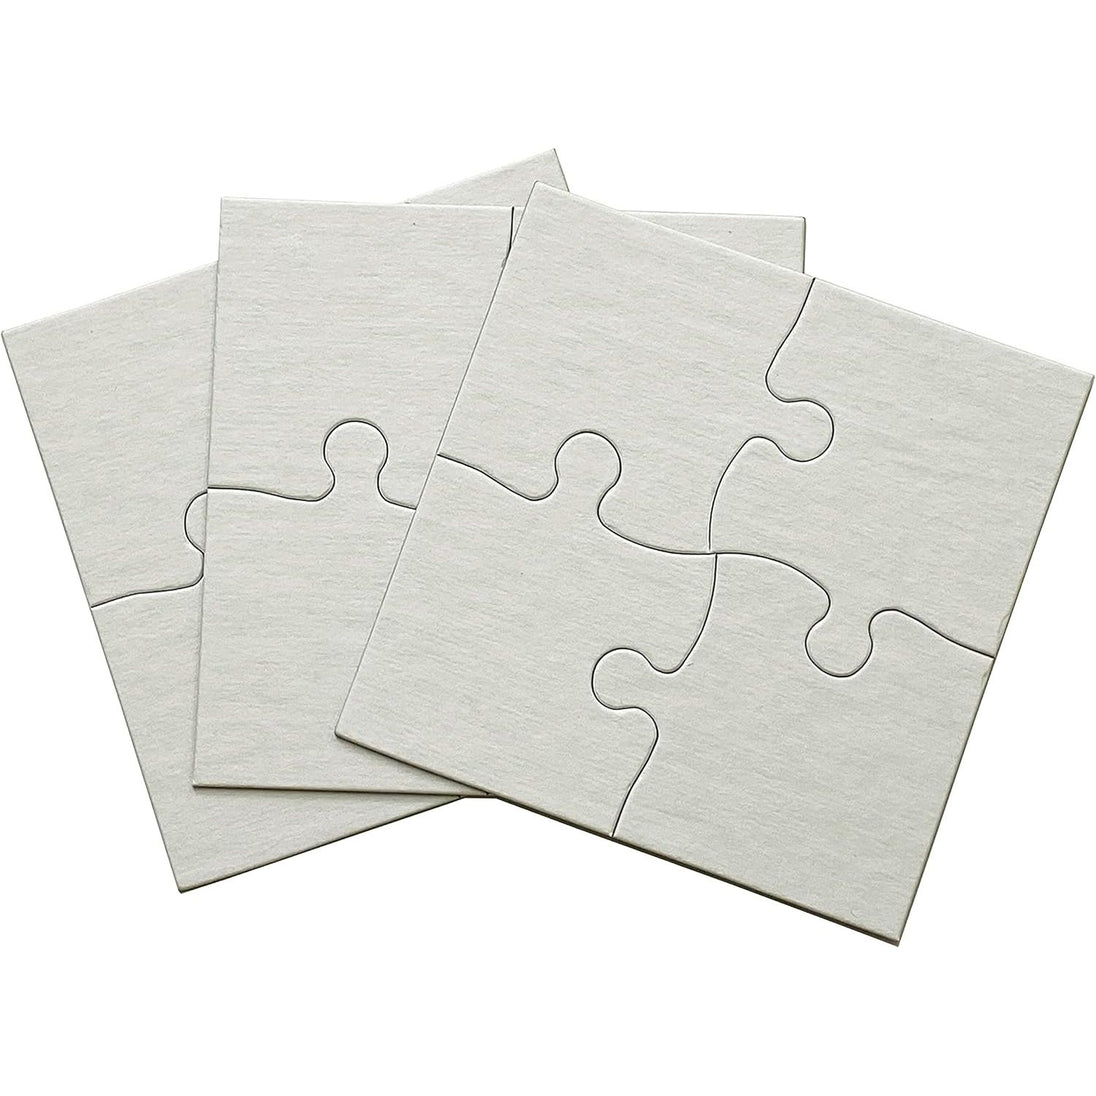 4-Piece Blank Puzzle, 50 Puzzles Per Package, 4" x 4", White